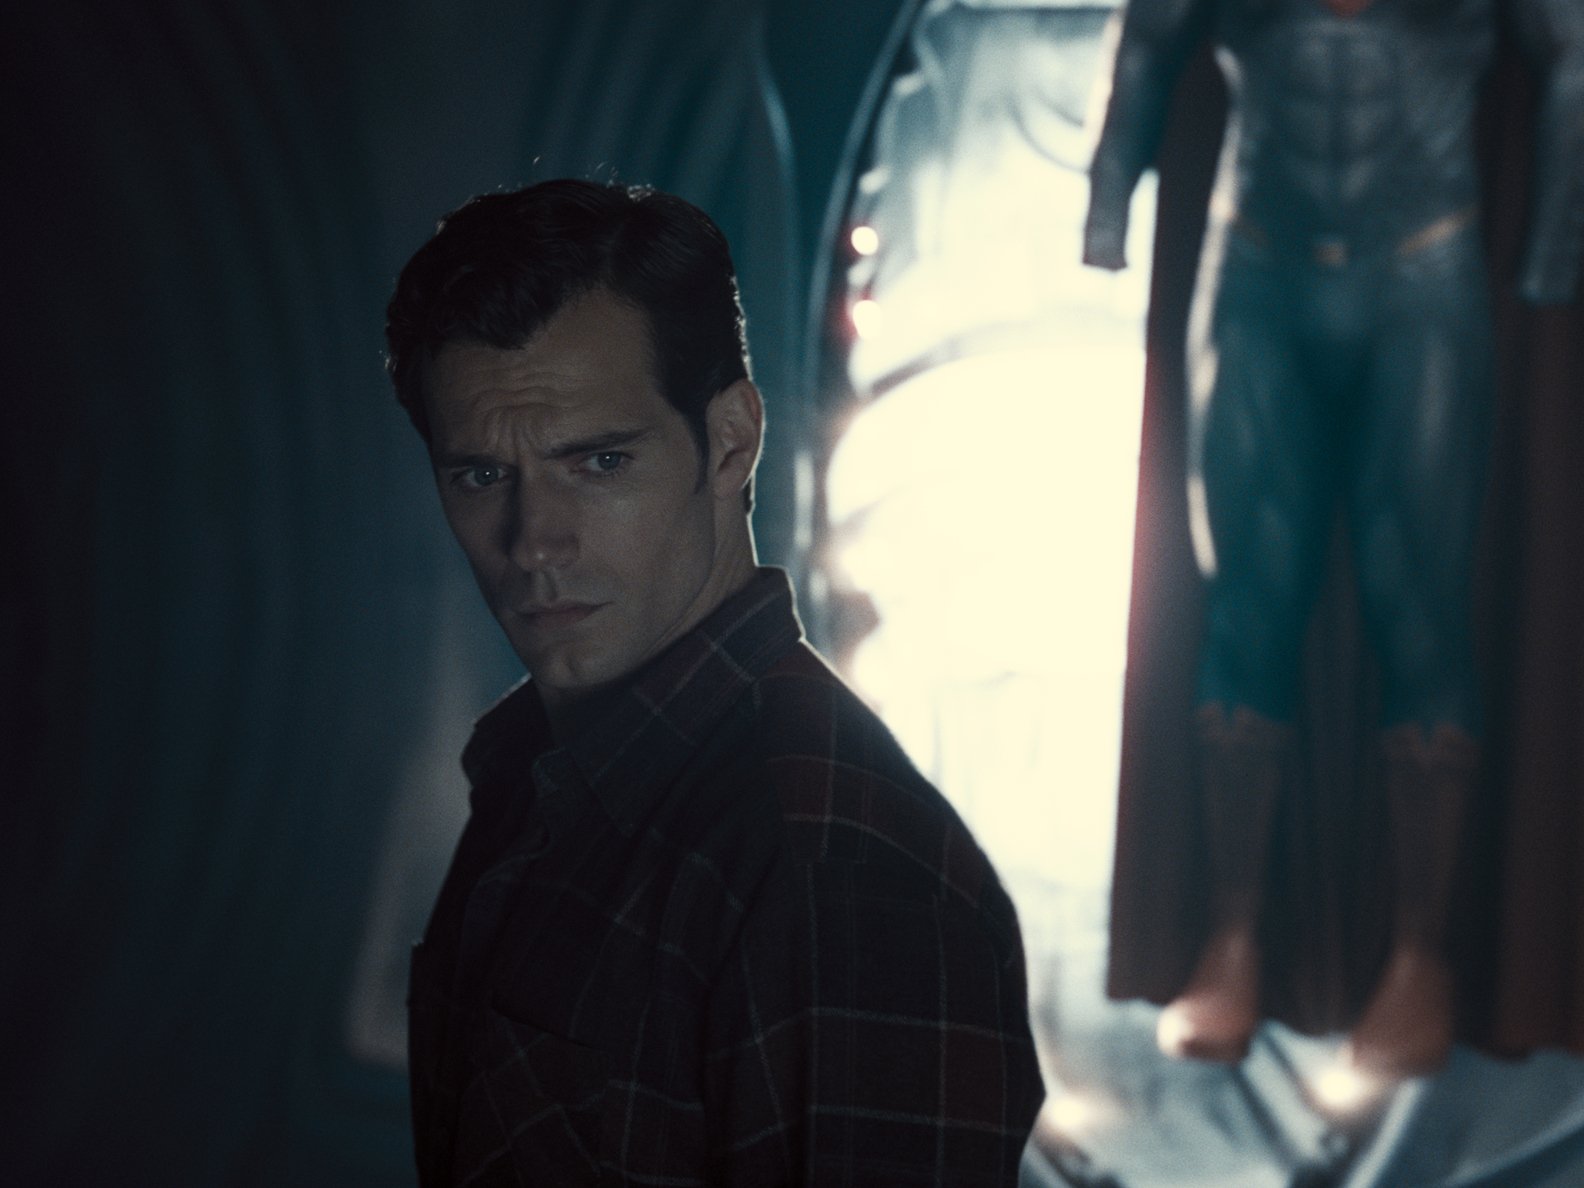 Henry Cavill as Superman/Clark Kent in 'Zack Snyder's Justice League.' He's wearing a black flannel shirt and the Superman suit is in the background